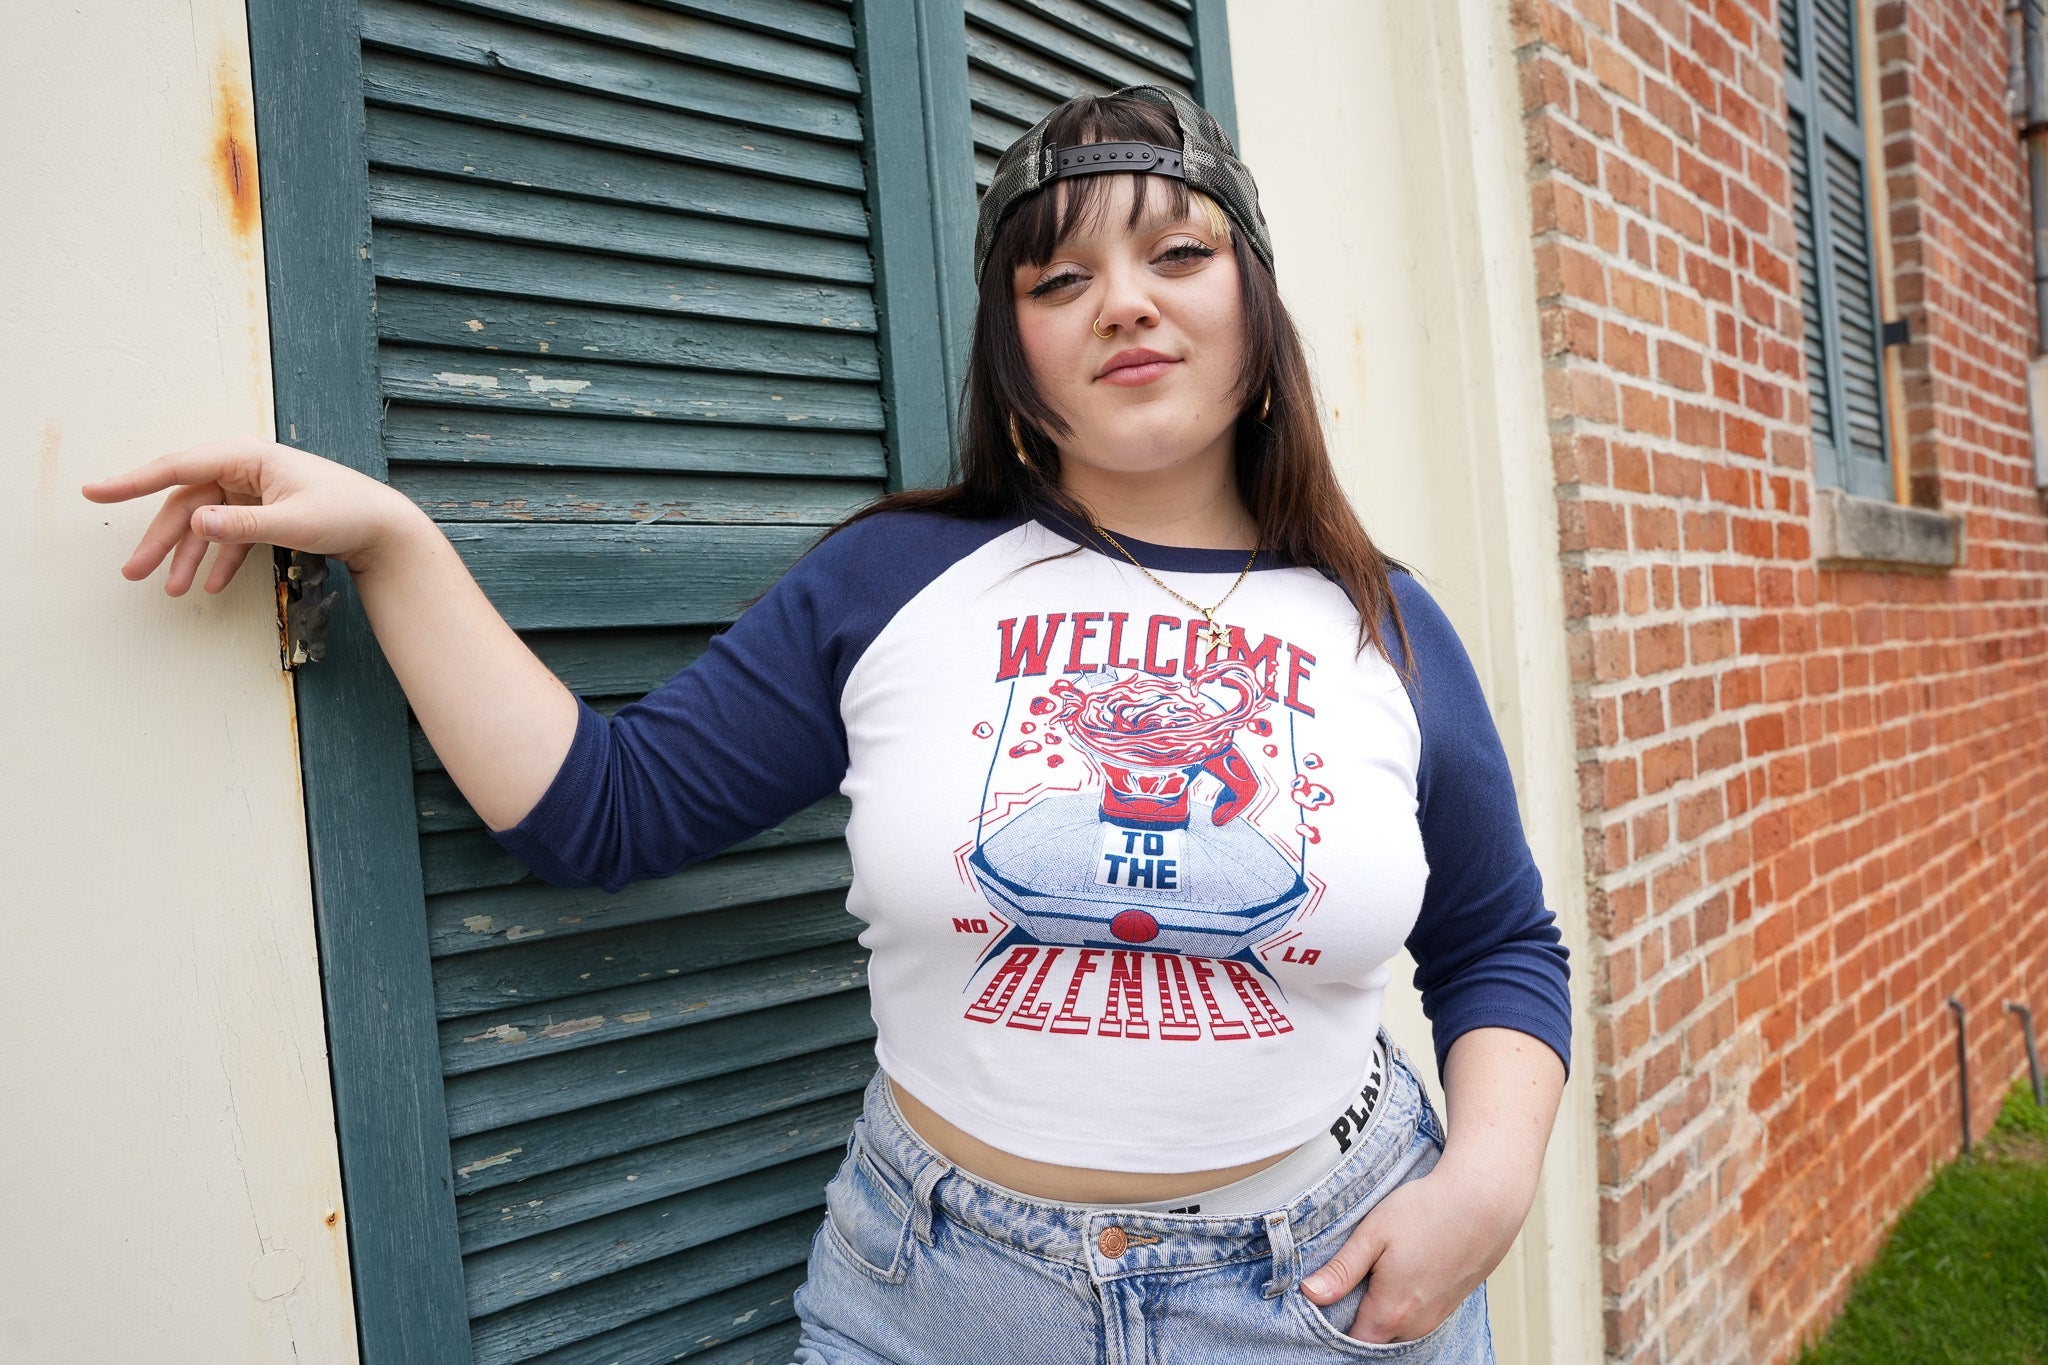 Welcome To The Blender Cropped Baseball Tee - Dirty Coast